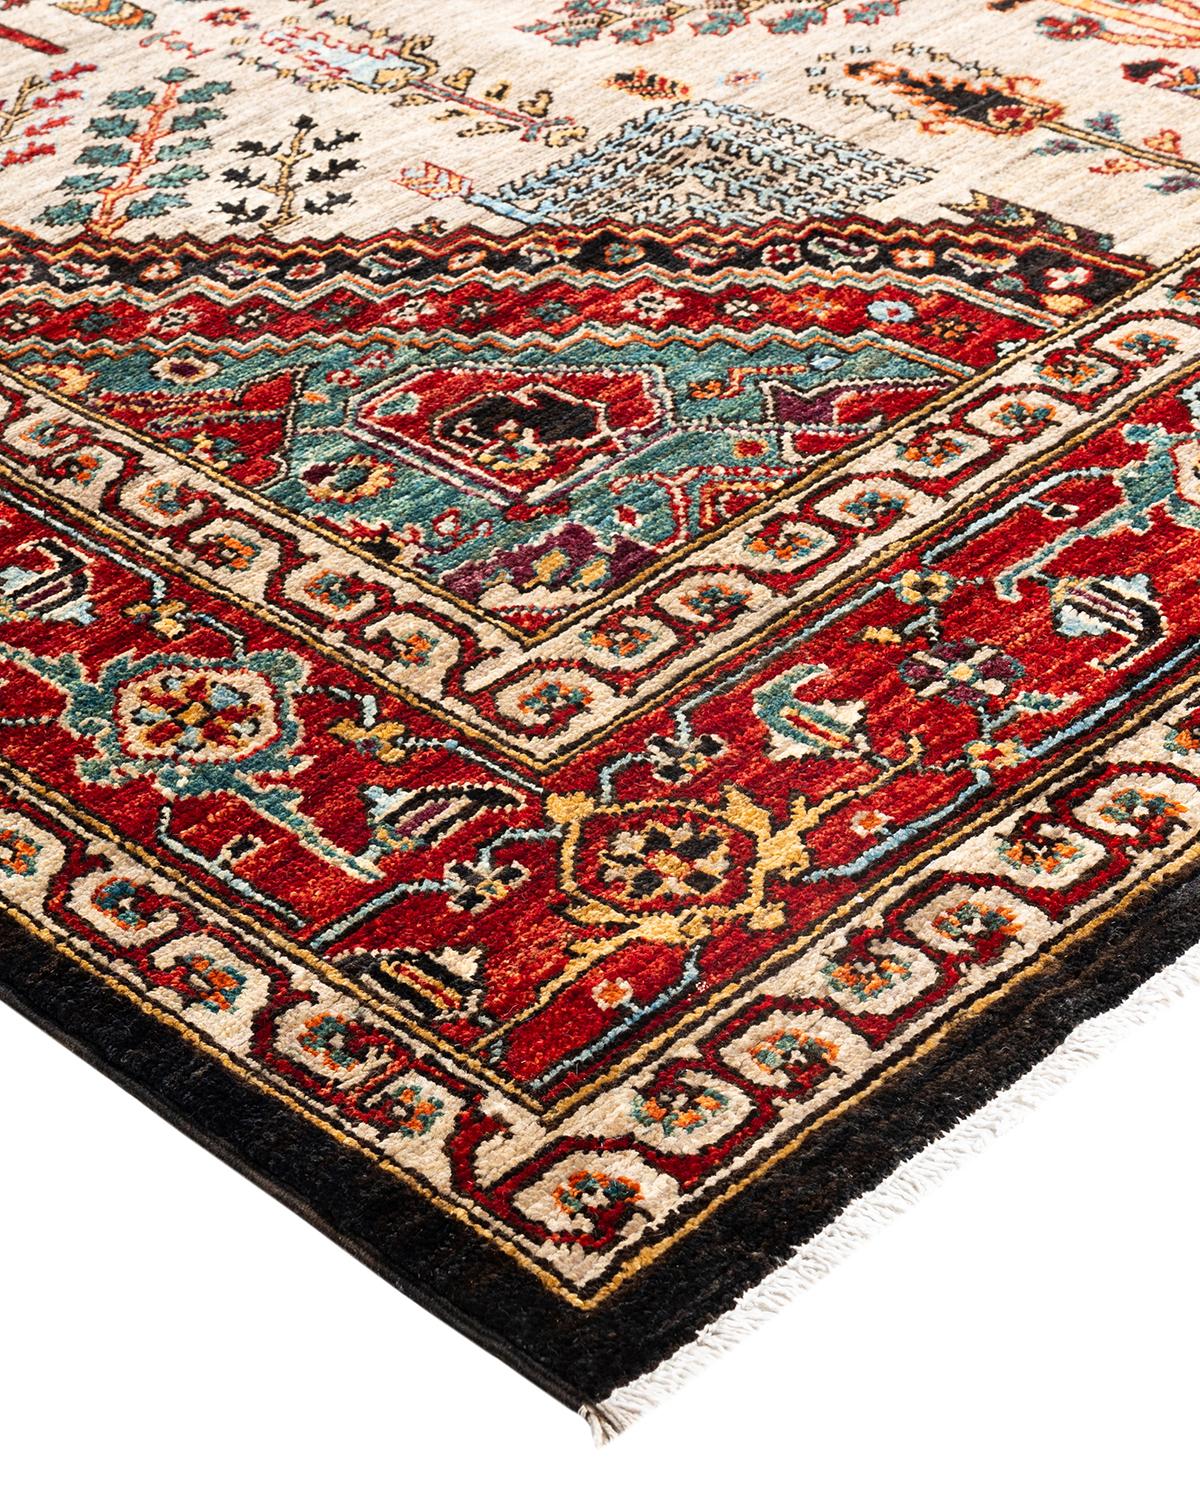 Persian rug-making at its finest inspired the rich colors, elaborate geometric motifs, and botanical detailing of the Serapi collection. With as many as 100 knots per inch, these handcrafted rugs are as durable as they are visually stunning, and